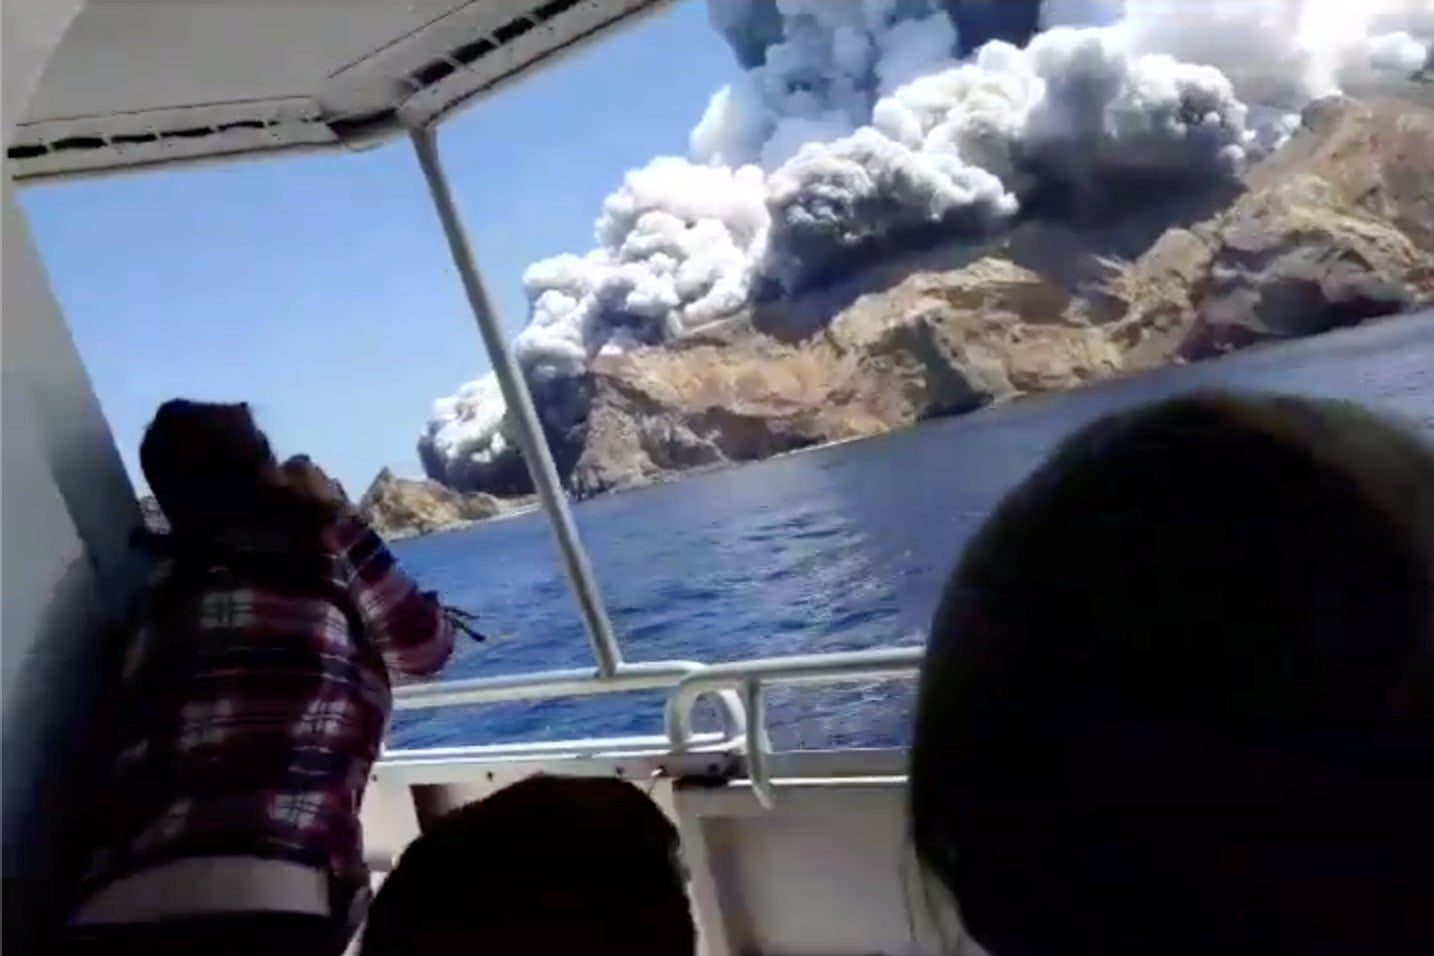 The volcanic eruption is seen from inside a boat. A passenger in the boat leans forward, possibly to take a photo.